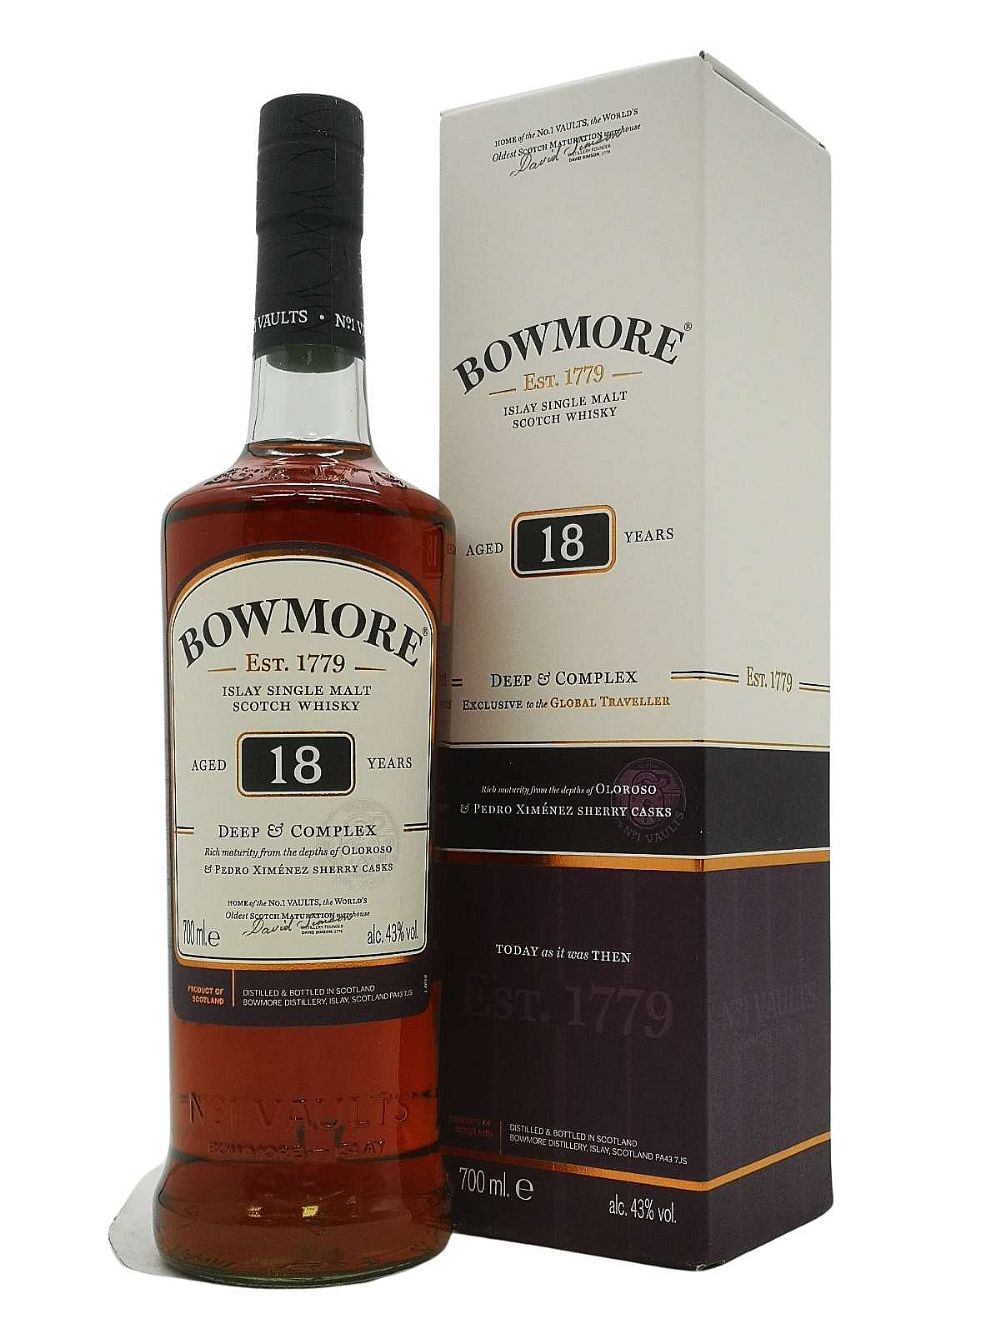 Bowmore 18 year old Islay Single Malt Scotch Whisky, Travel Exclusive